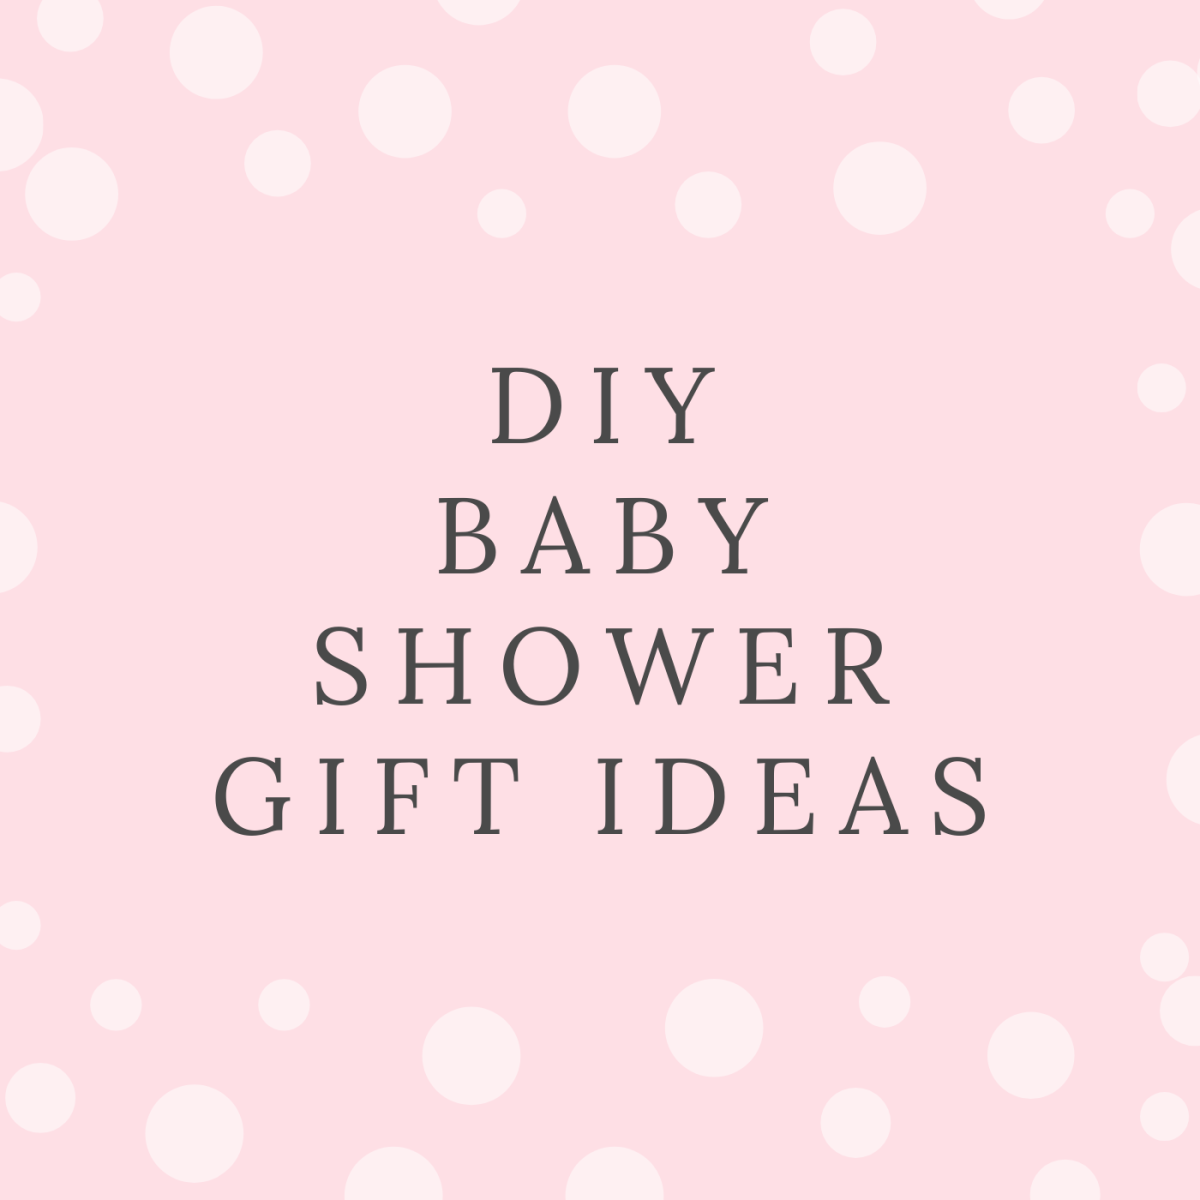 50+ Super Cute DIY Baby Shower Wardrobe Gift Ideas That Moms-to-Be Will Adore